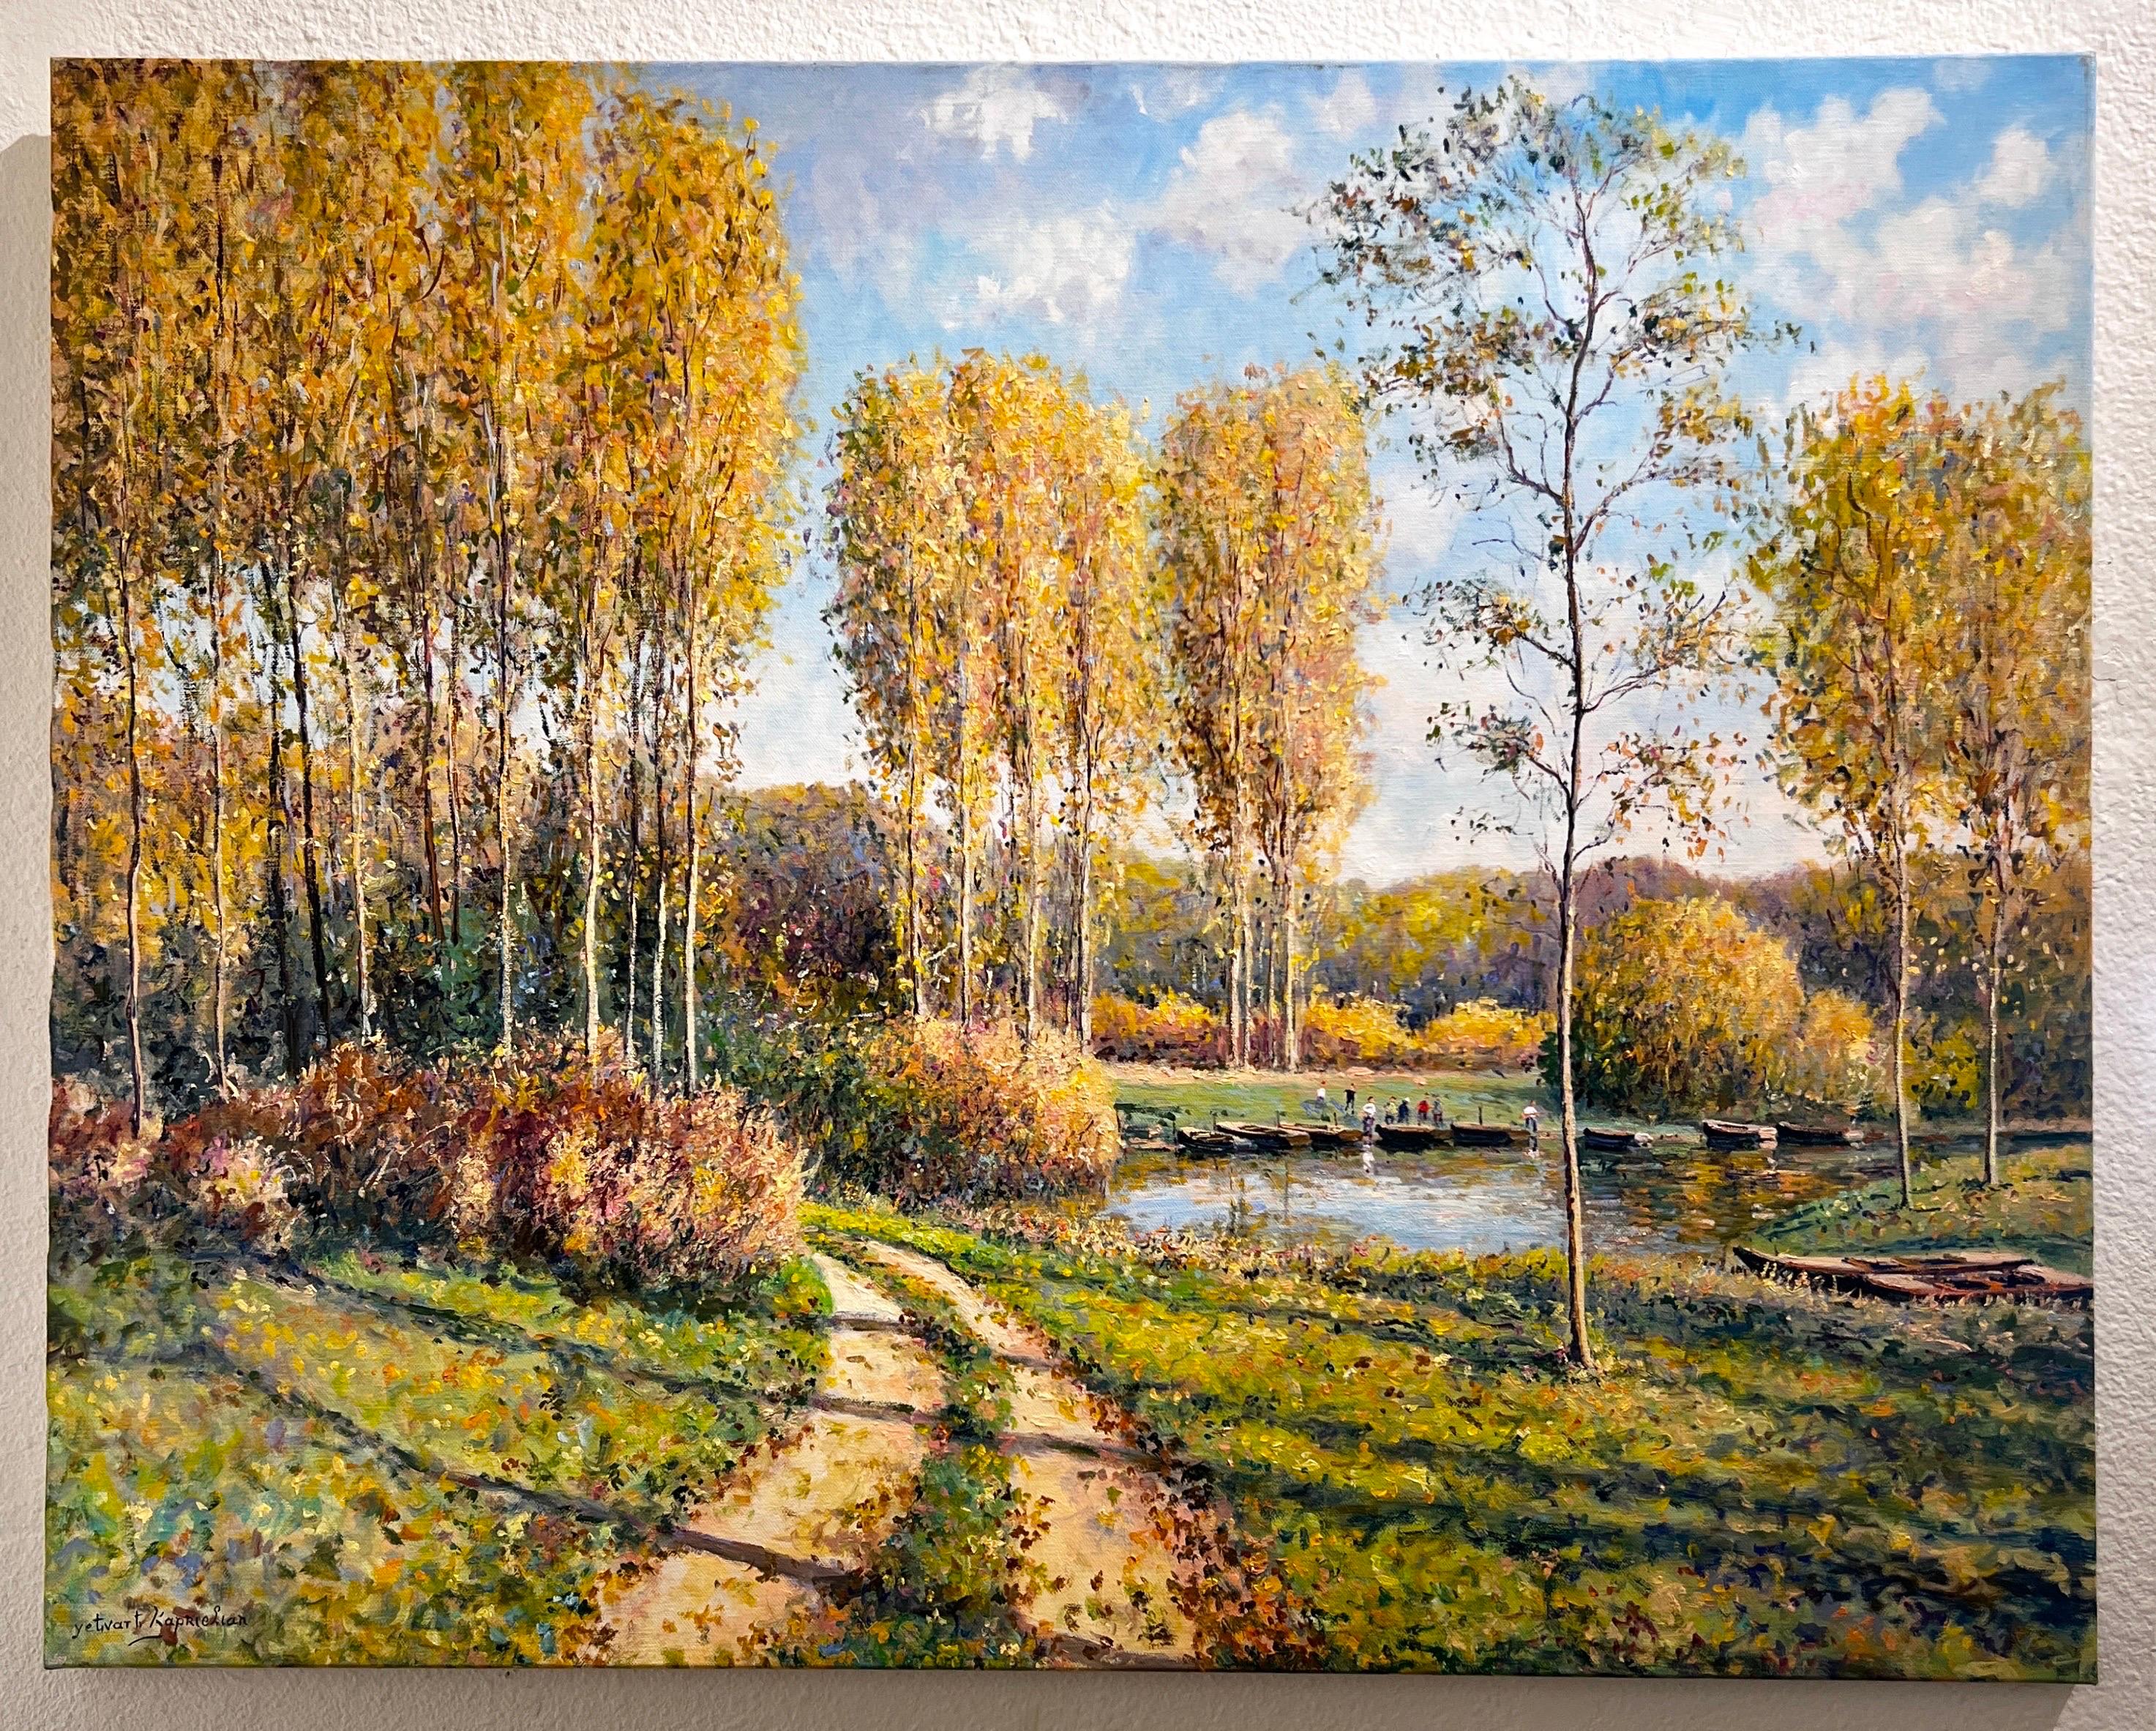 The painting is signed lower left. Title: Les Marais de St. Quentin d'Ecourt

In this captivating oil painting, Yetvart showcases his mastery of Impressionist techniques, which have become his signature style. The canvas depicts 